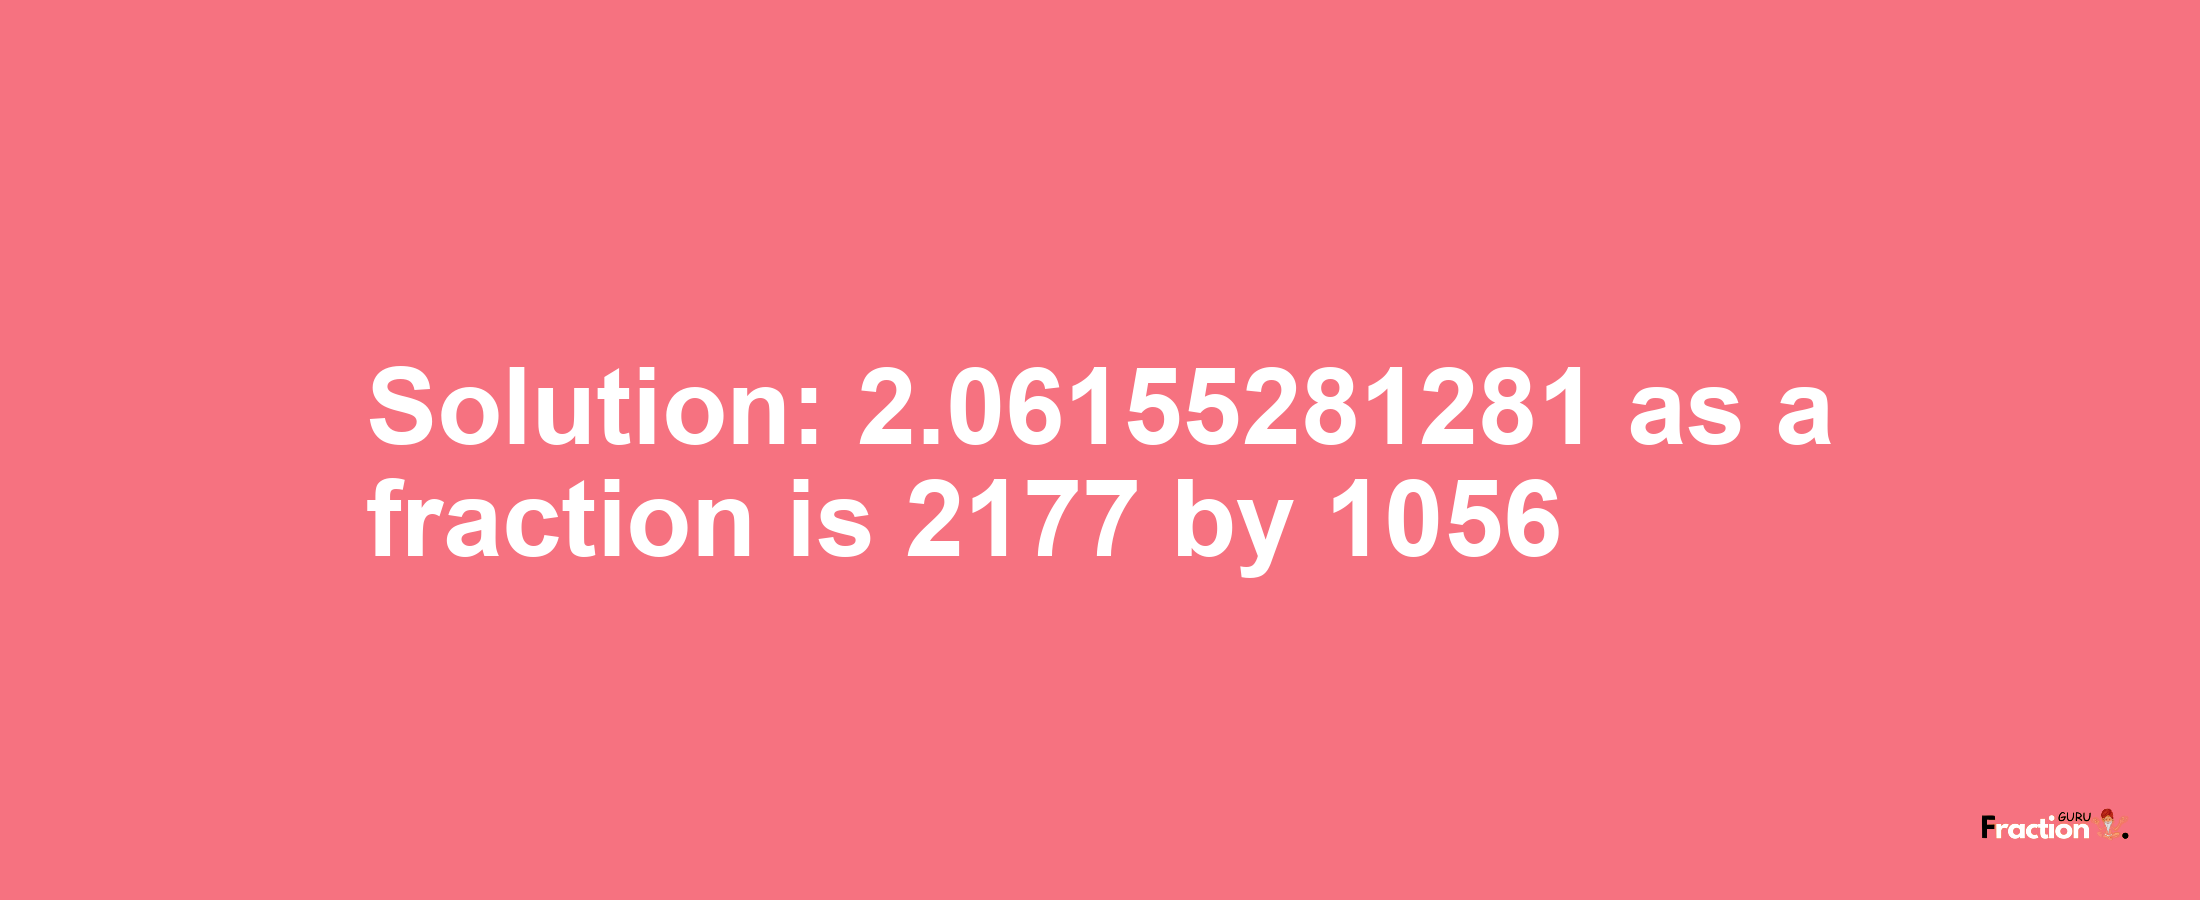 Solution:2.06155281281 as a fraction is 2177/1056